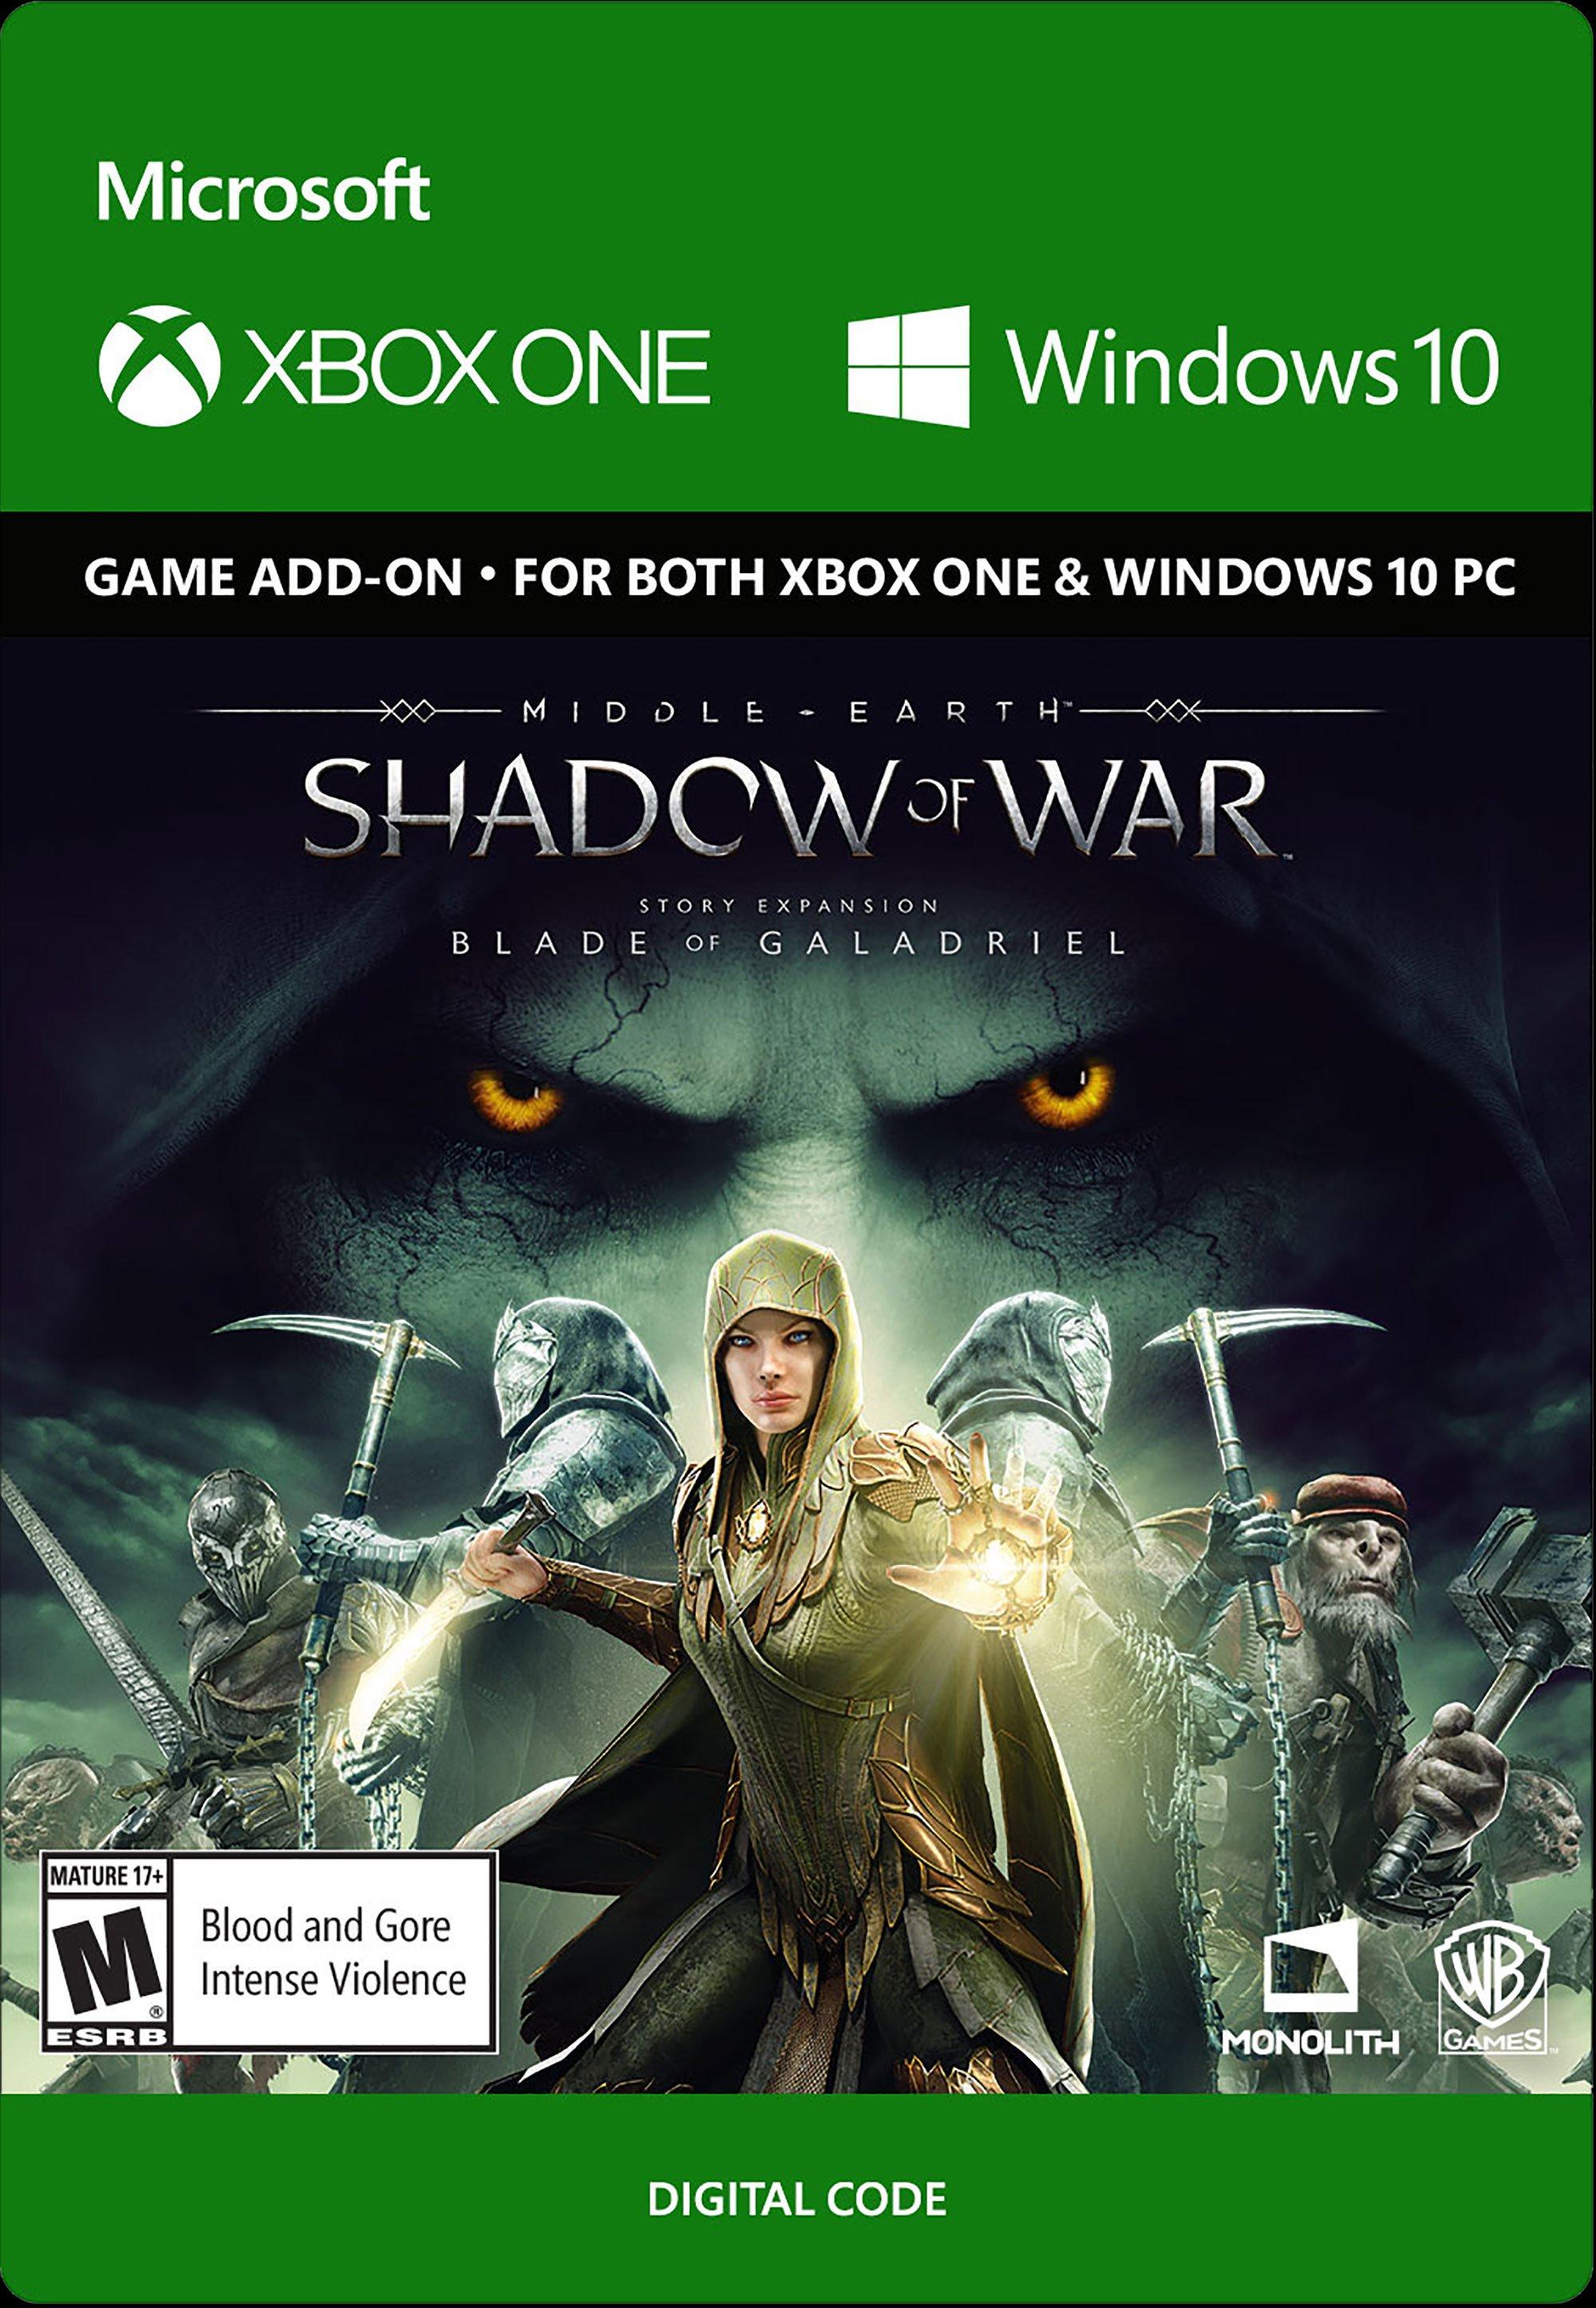 Middle-earth: Shadow of War - The Blade of Galadriel Story Expansion - PC -  Buy it at Nuuvem